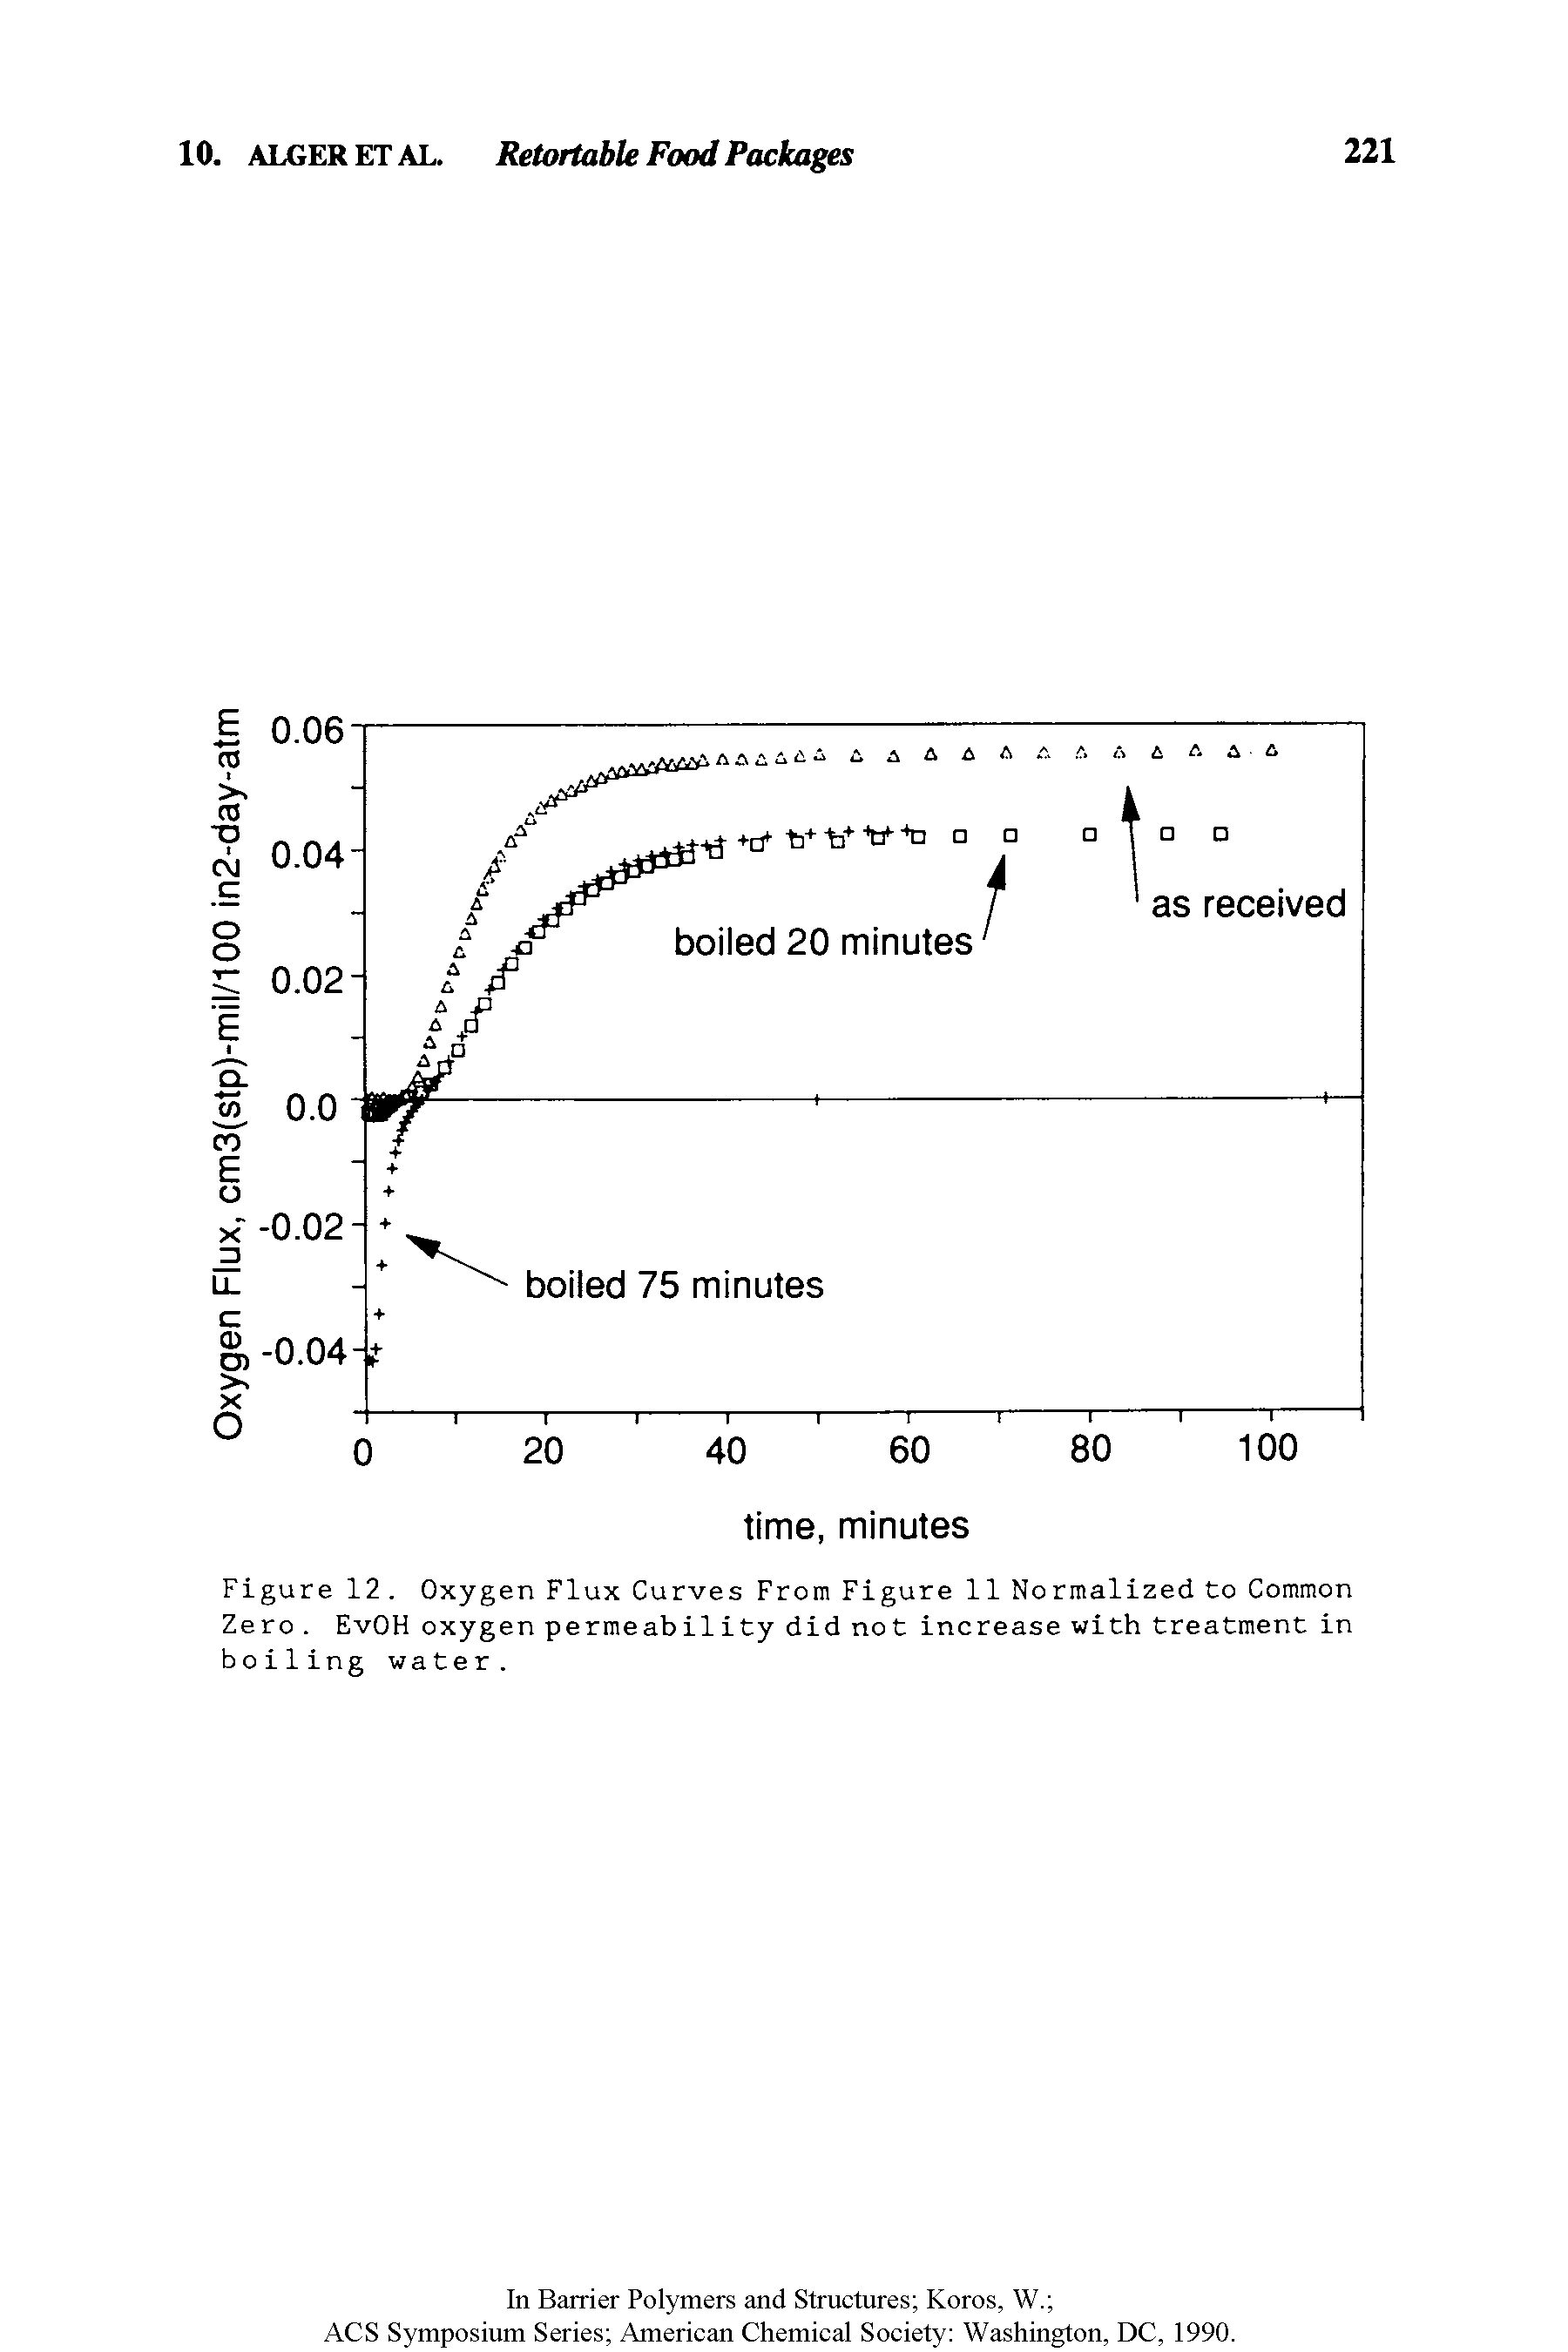 Figure 12. Oxygen Flux Curves From Figure 11 Normalized to Common Zero. EvOH oxygen permeability did not increase with treatment in boiling water.